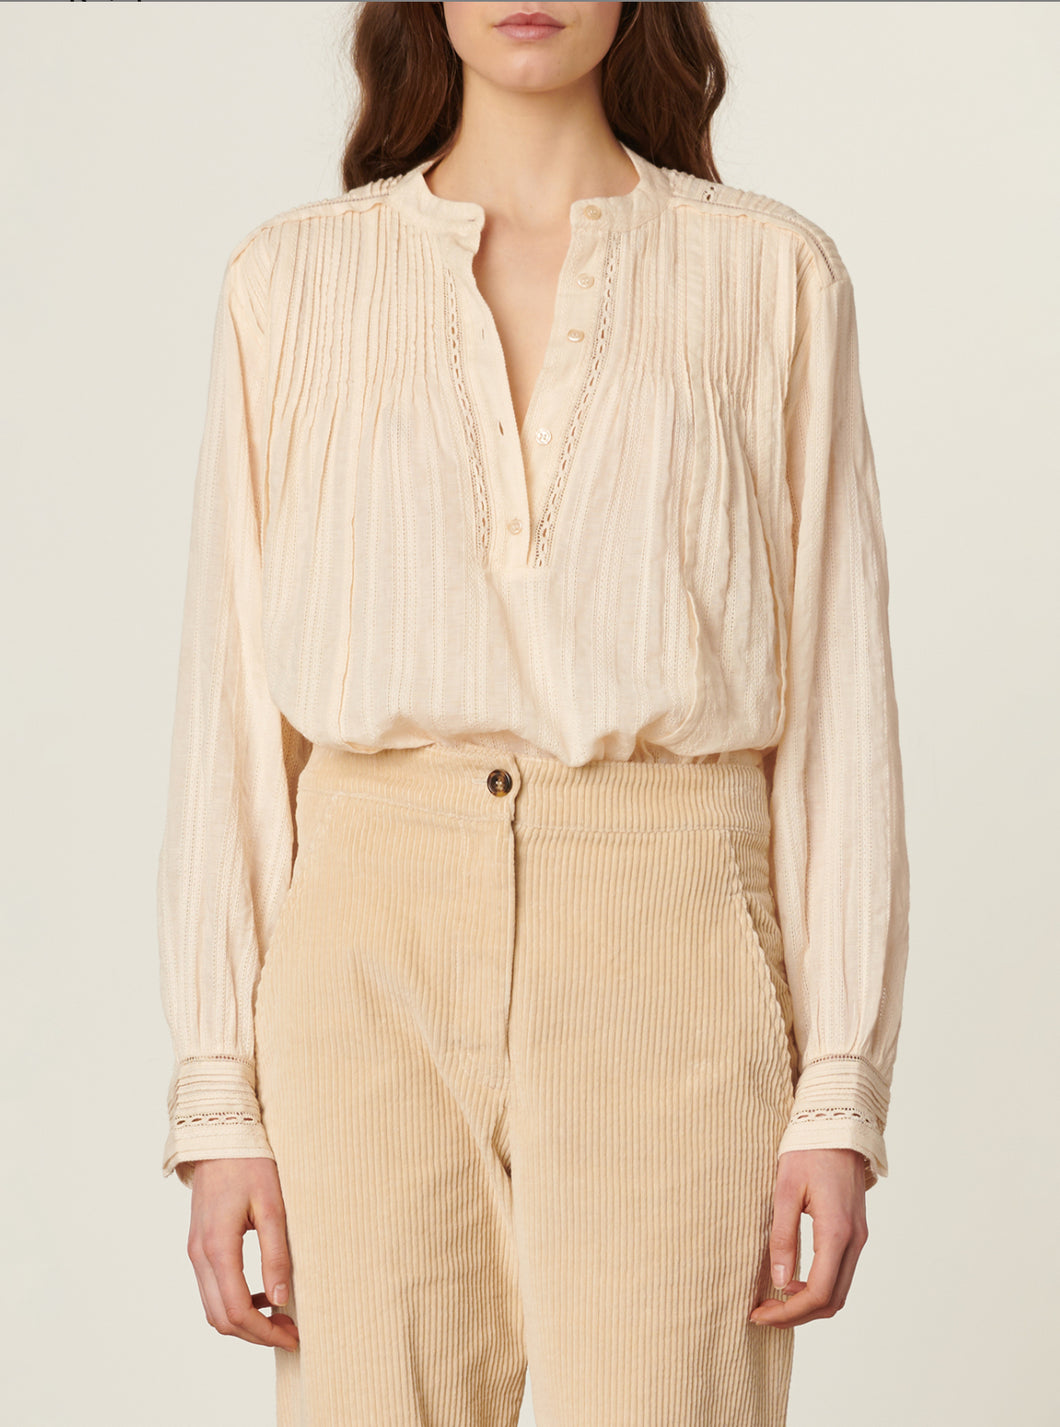 Natsumi Blouse in Eggshell